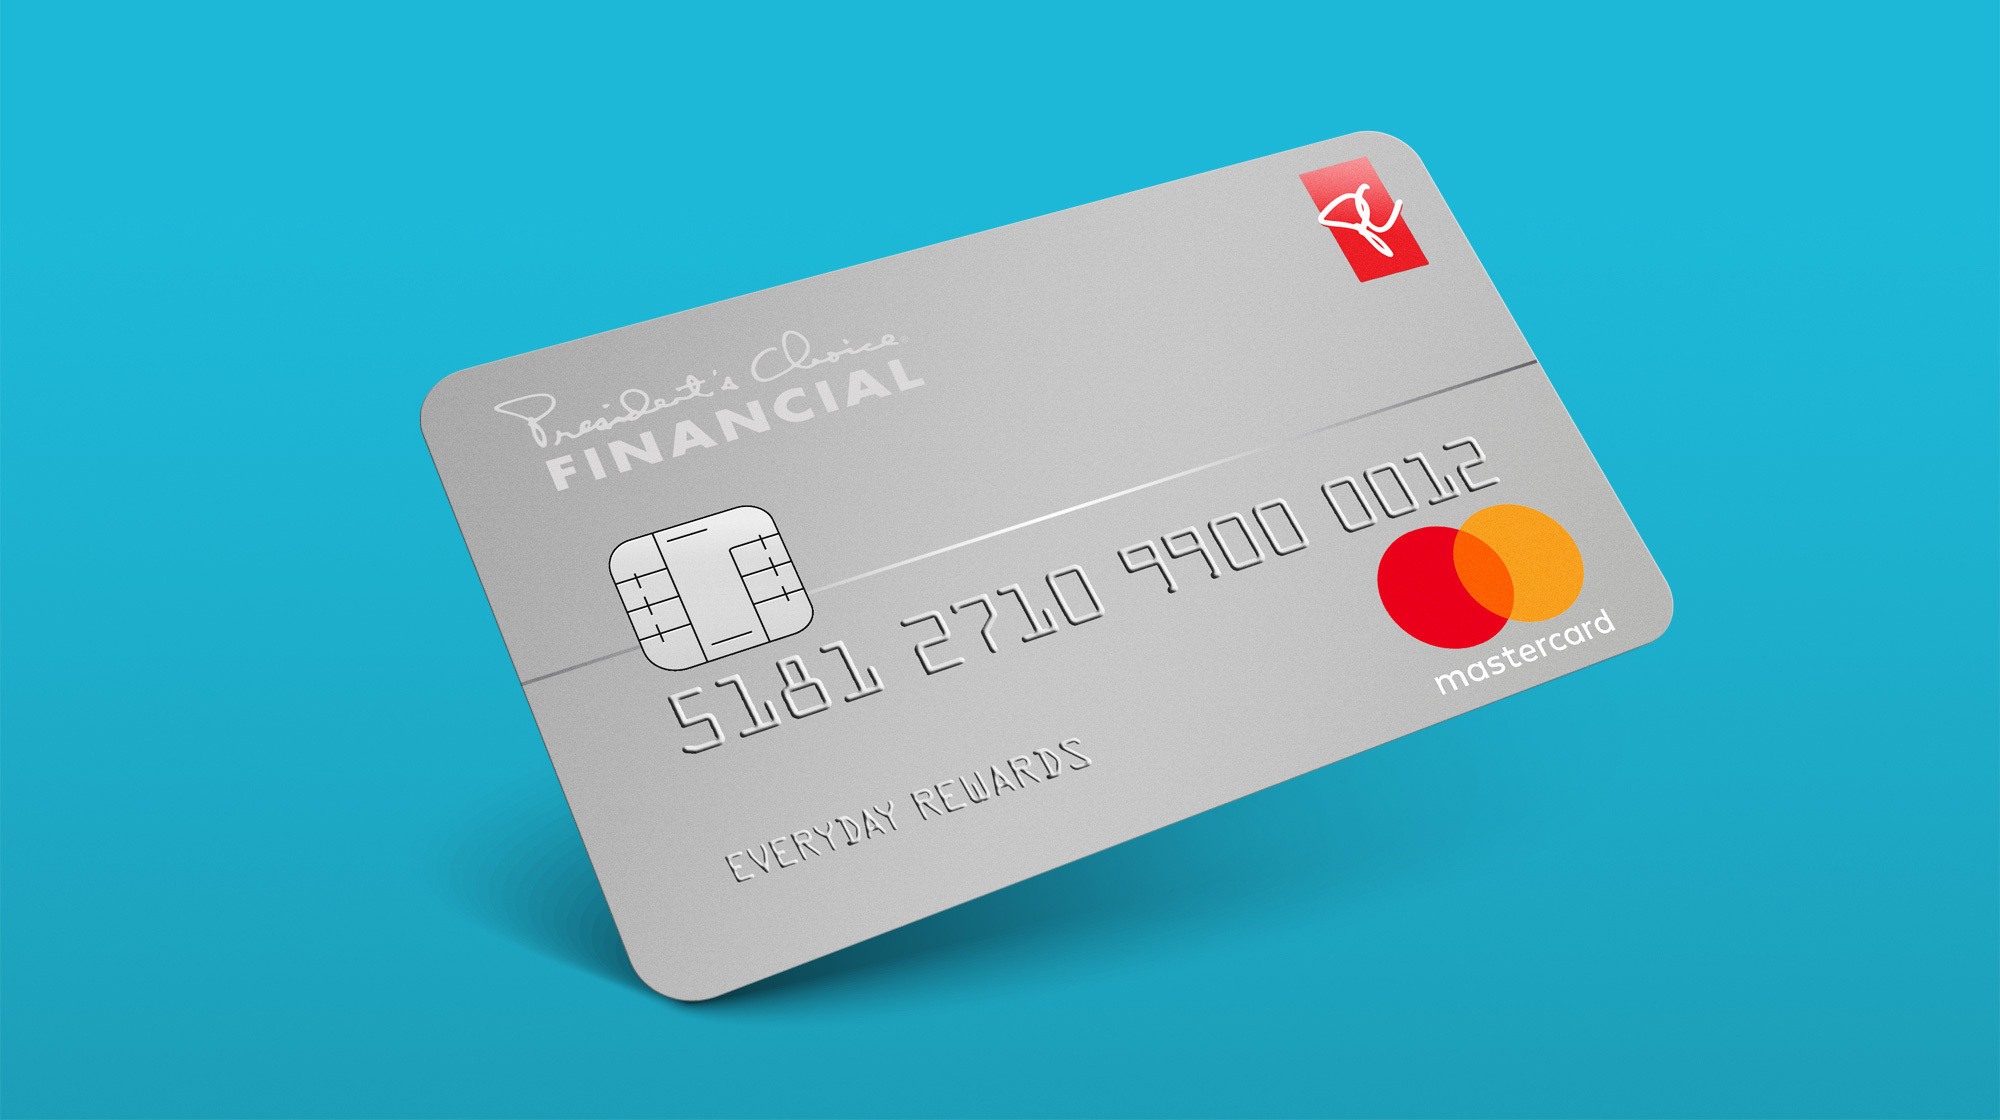 President Choice Credit Card: Benefits, Features, and How to Apply